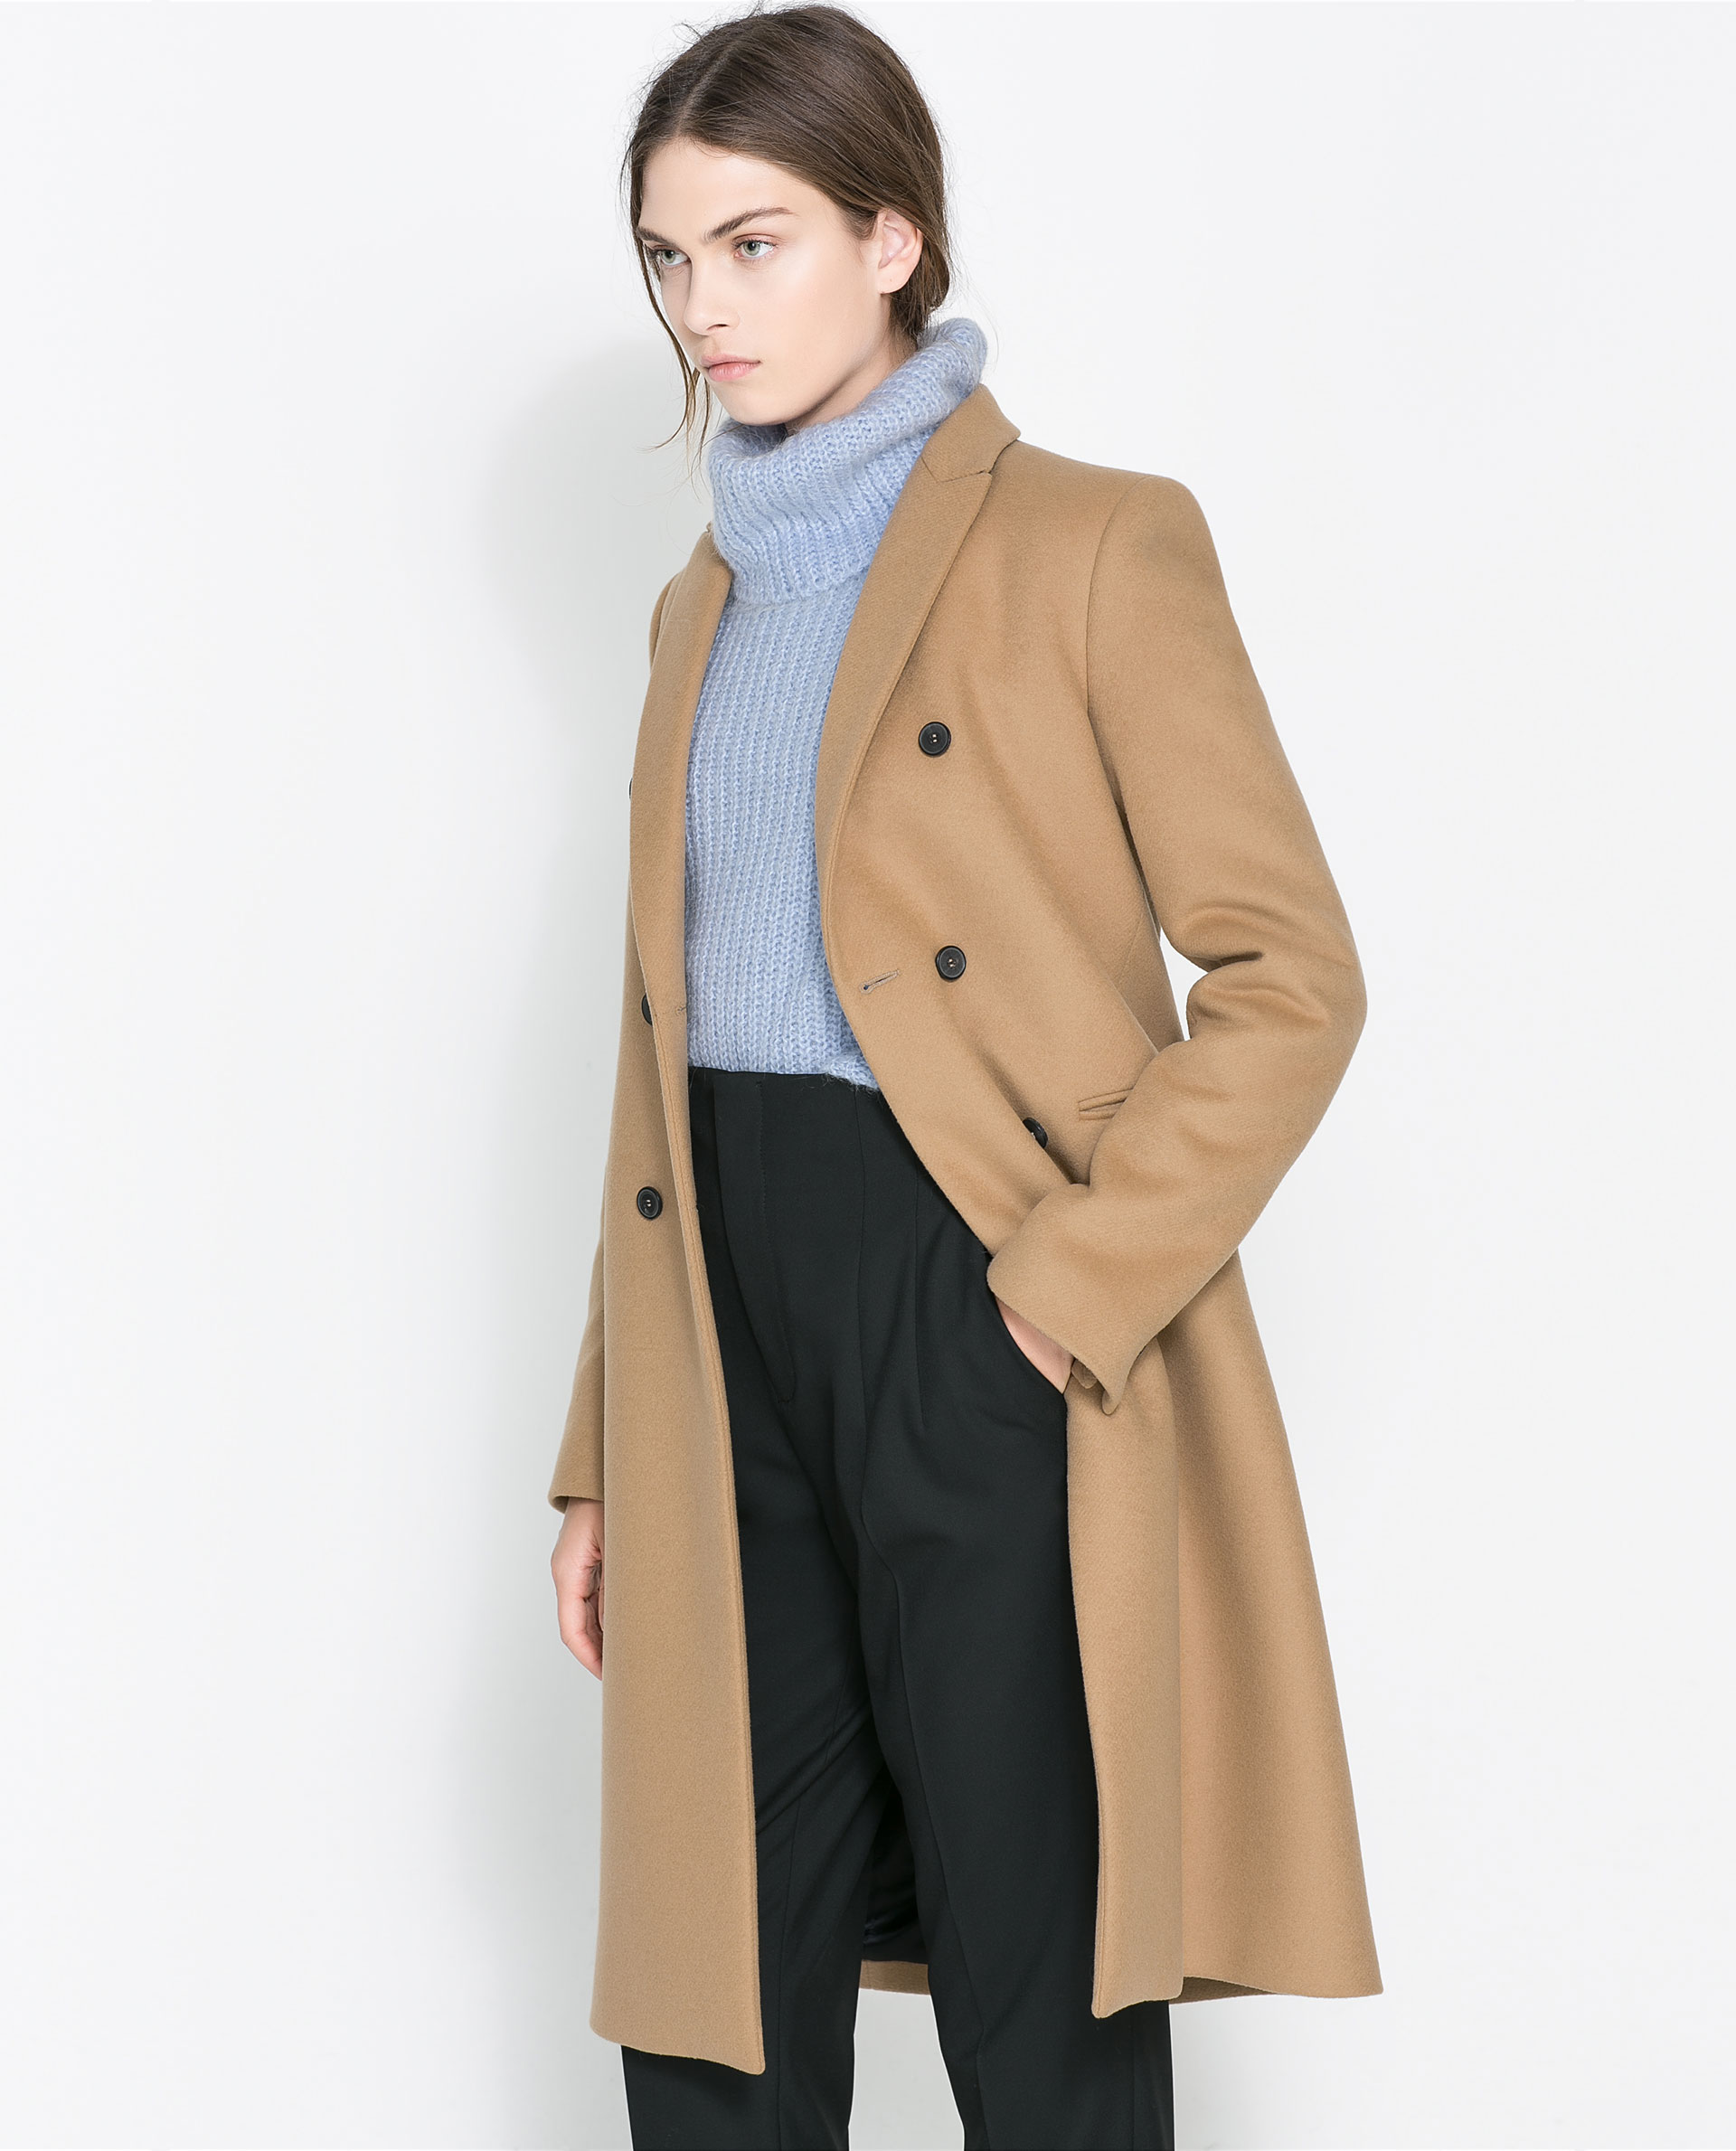 Zara Masculine Double Breasted Coat in Brown | Lyst